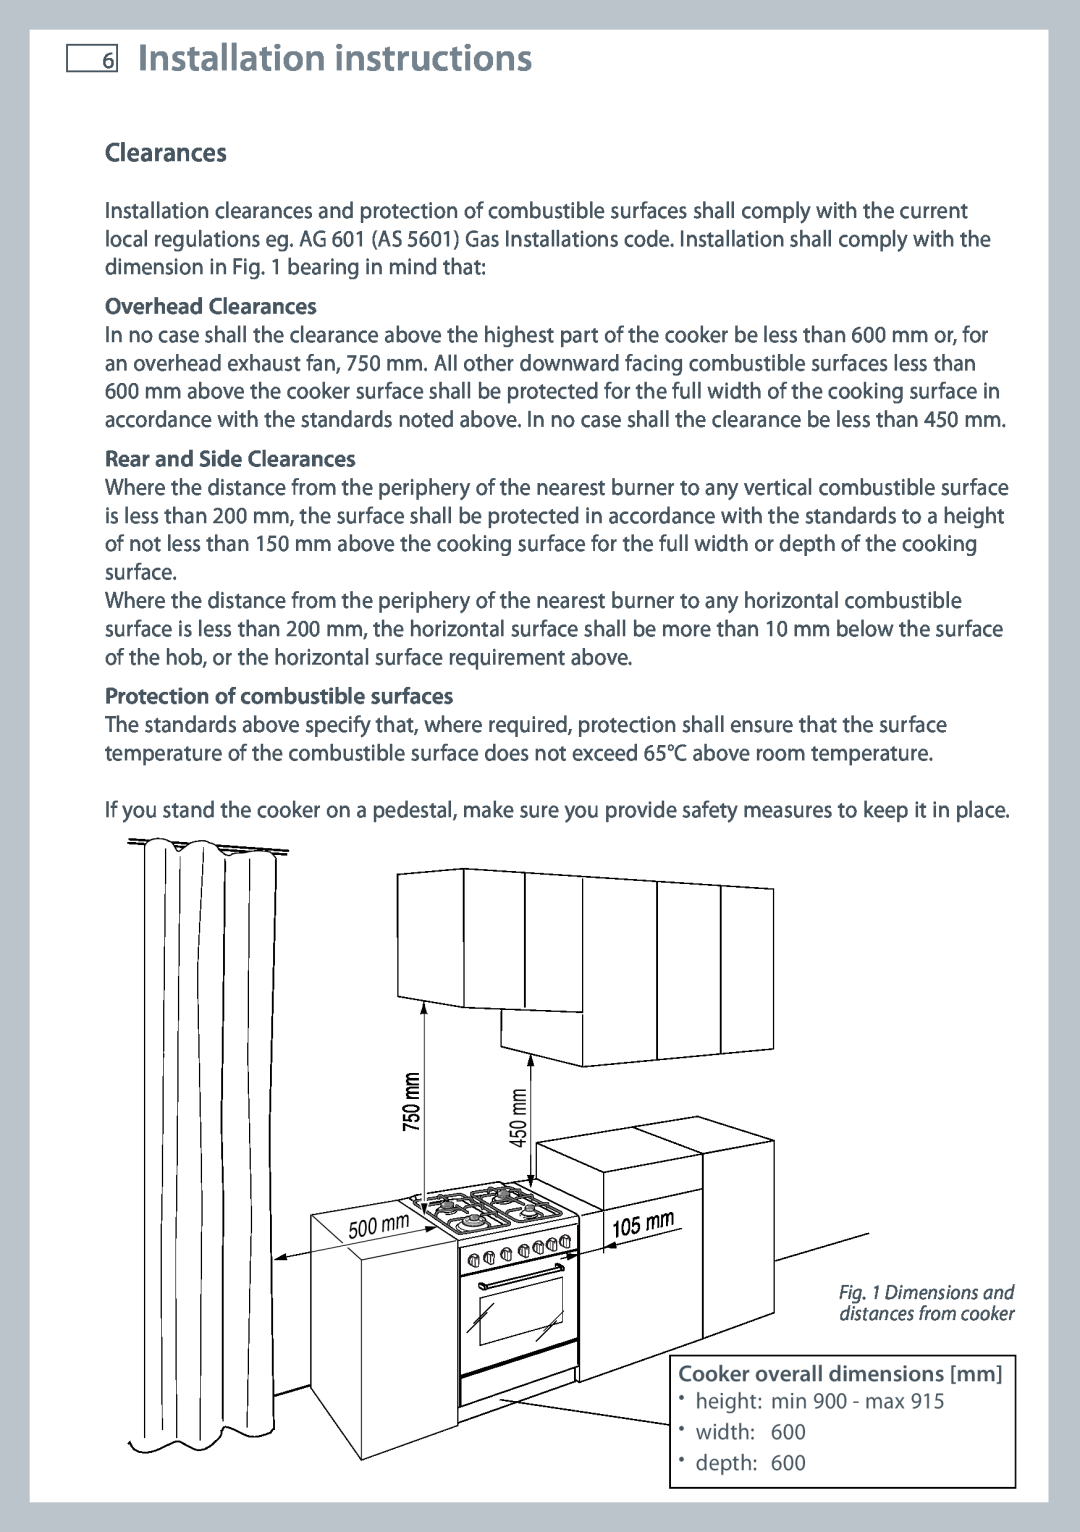 Fisher & Paykel 60 installation instructions Installation instructions, Overhead Clearances, Rear and Side Clearances 